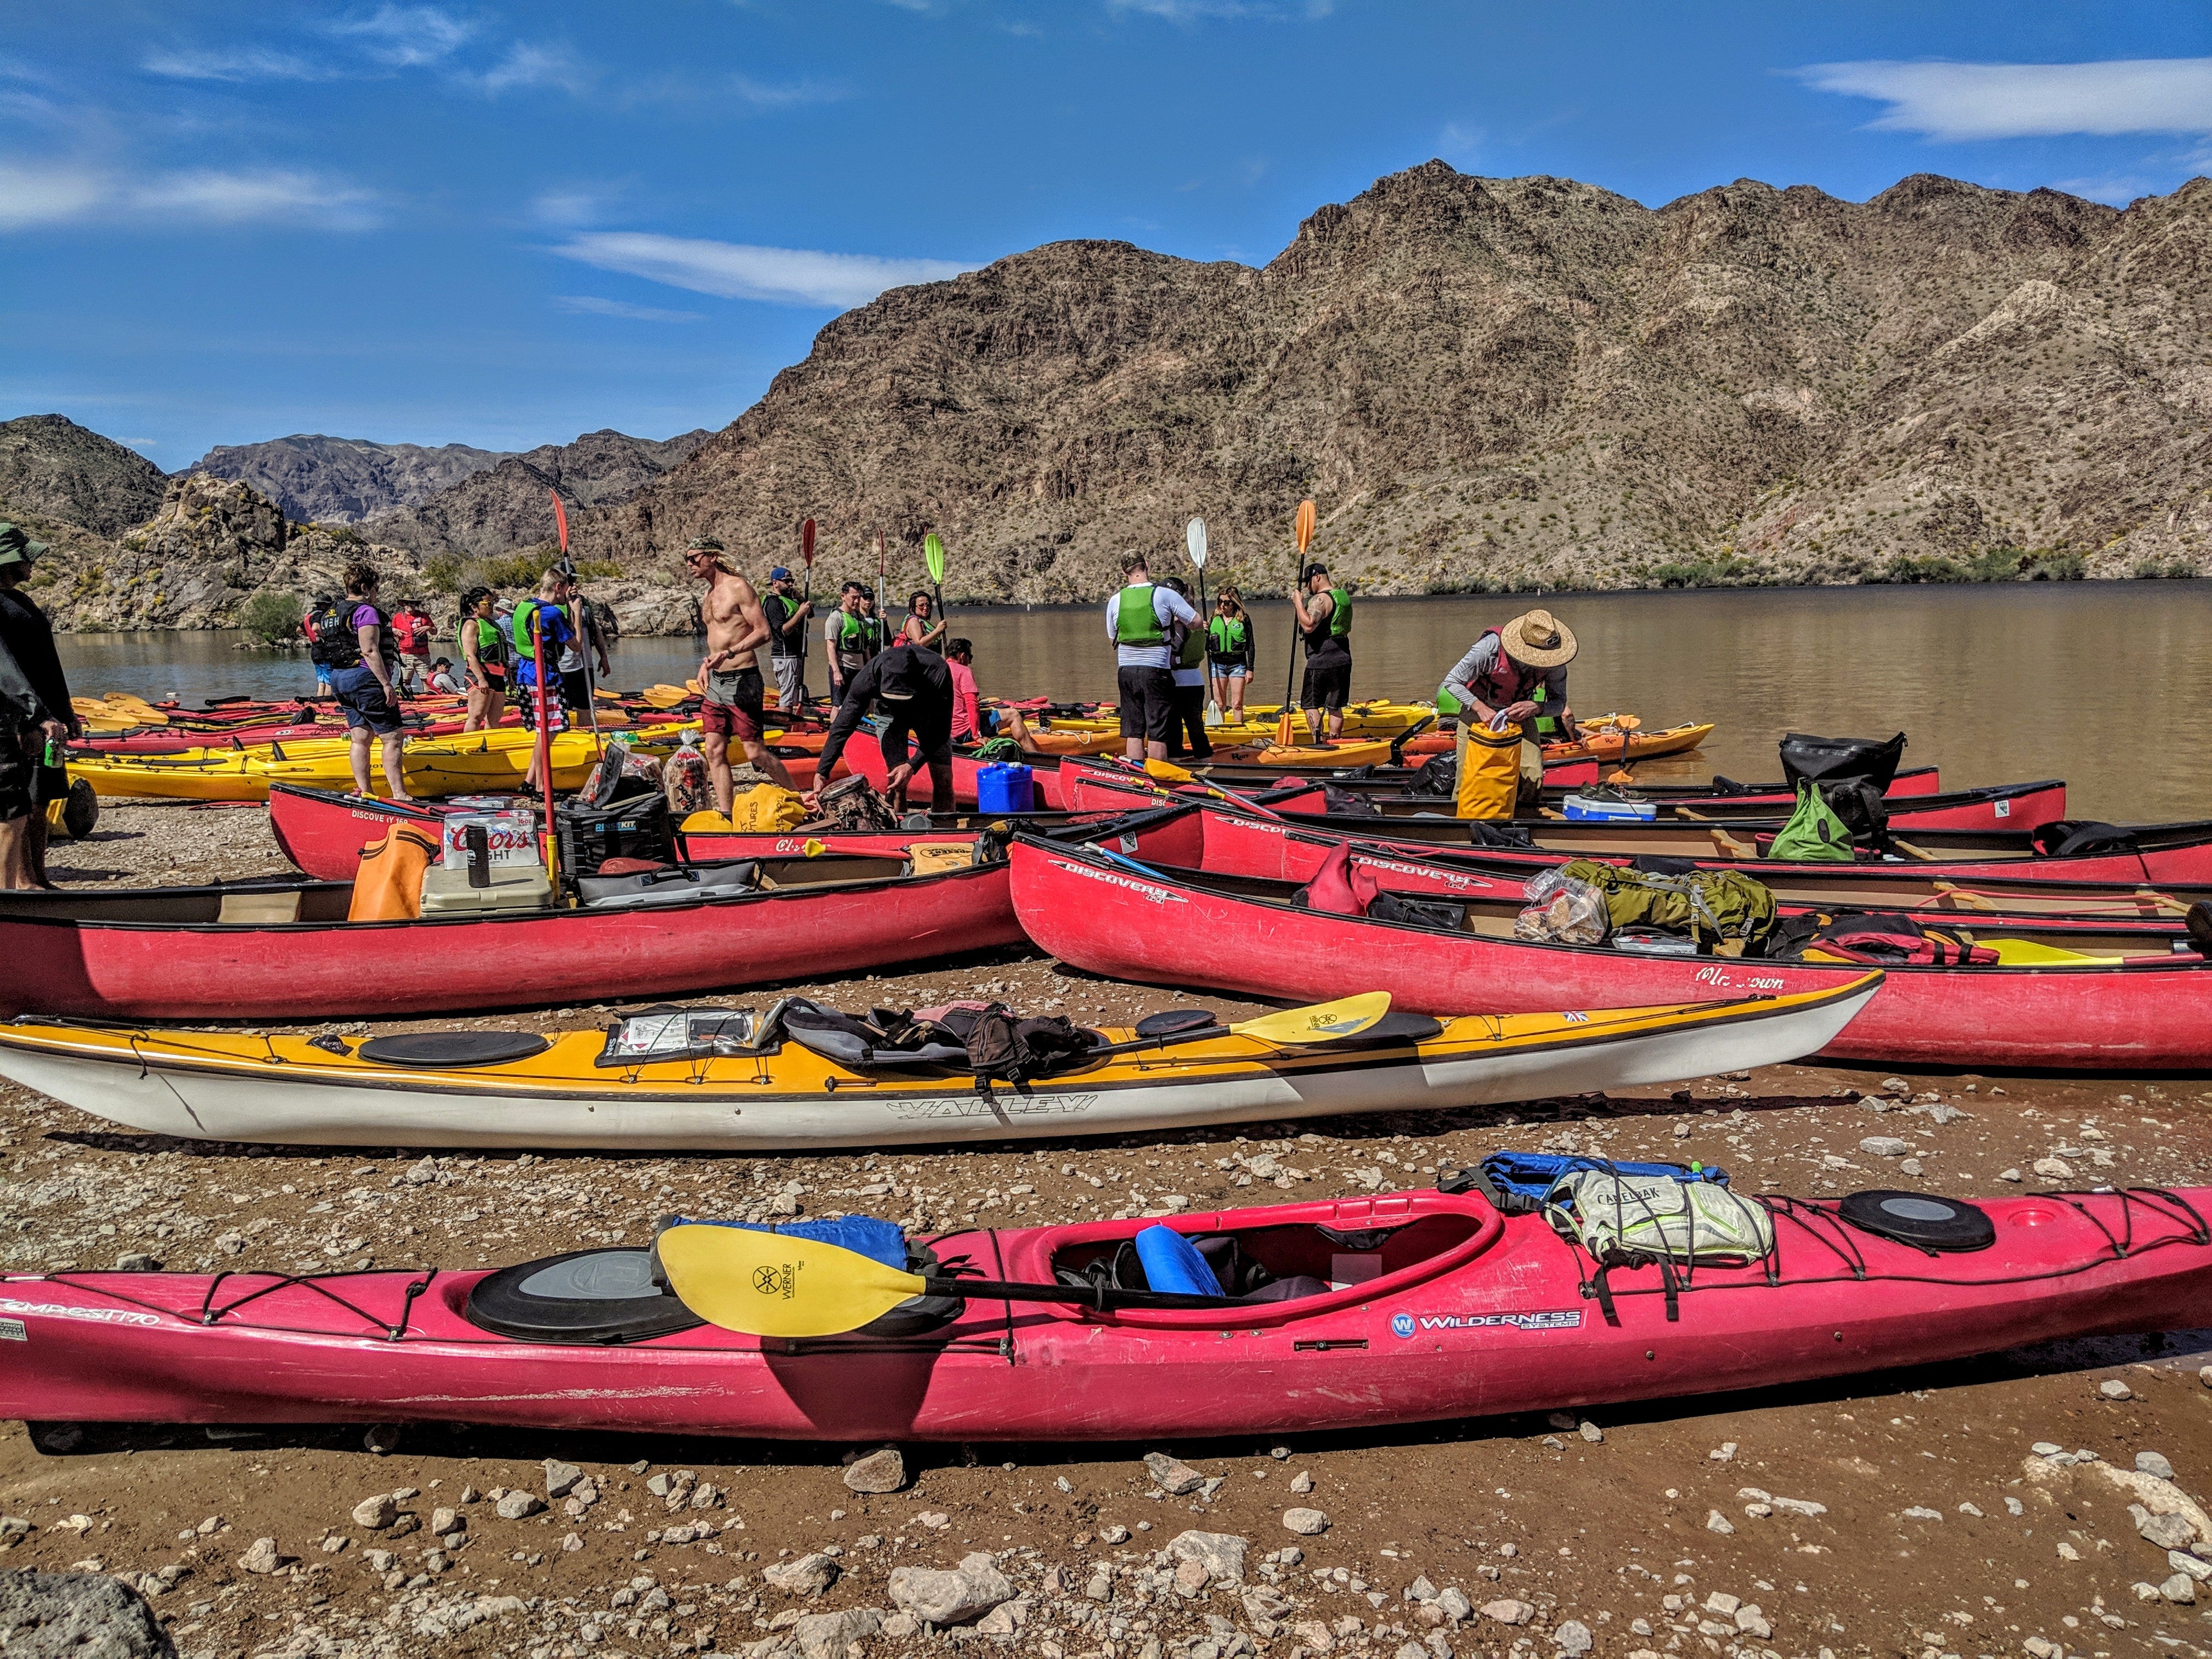 The put-in was NUTS on Friday morning with all the outfitters launching groups, but once on the river, you feel nearly alone.